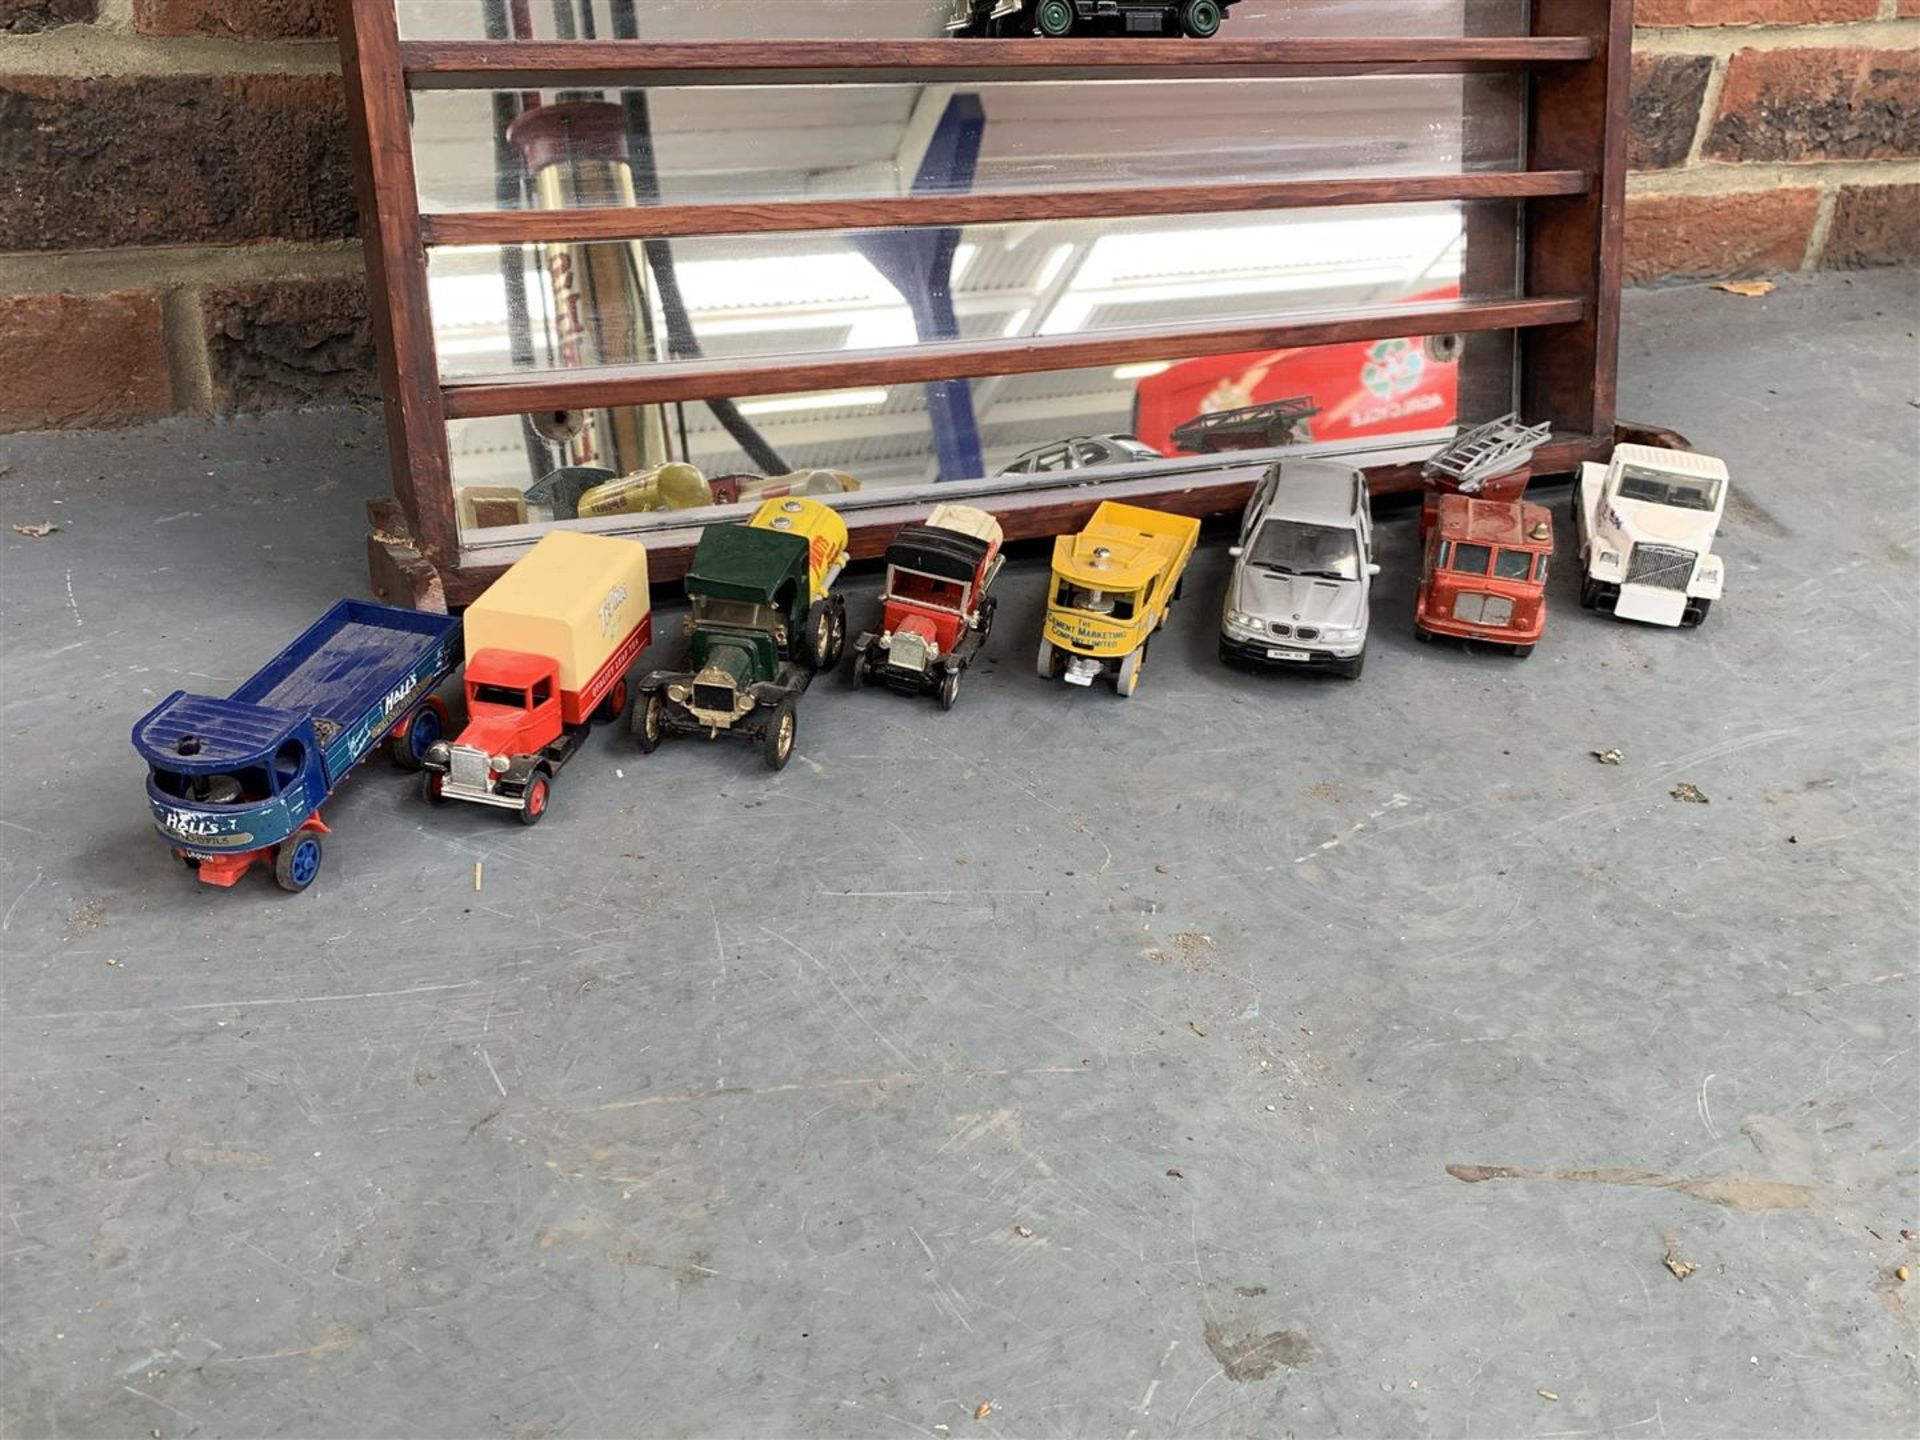 Shelf Of Play Worn Die Cast Toy Cars - Image 3 of 5